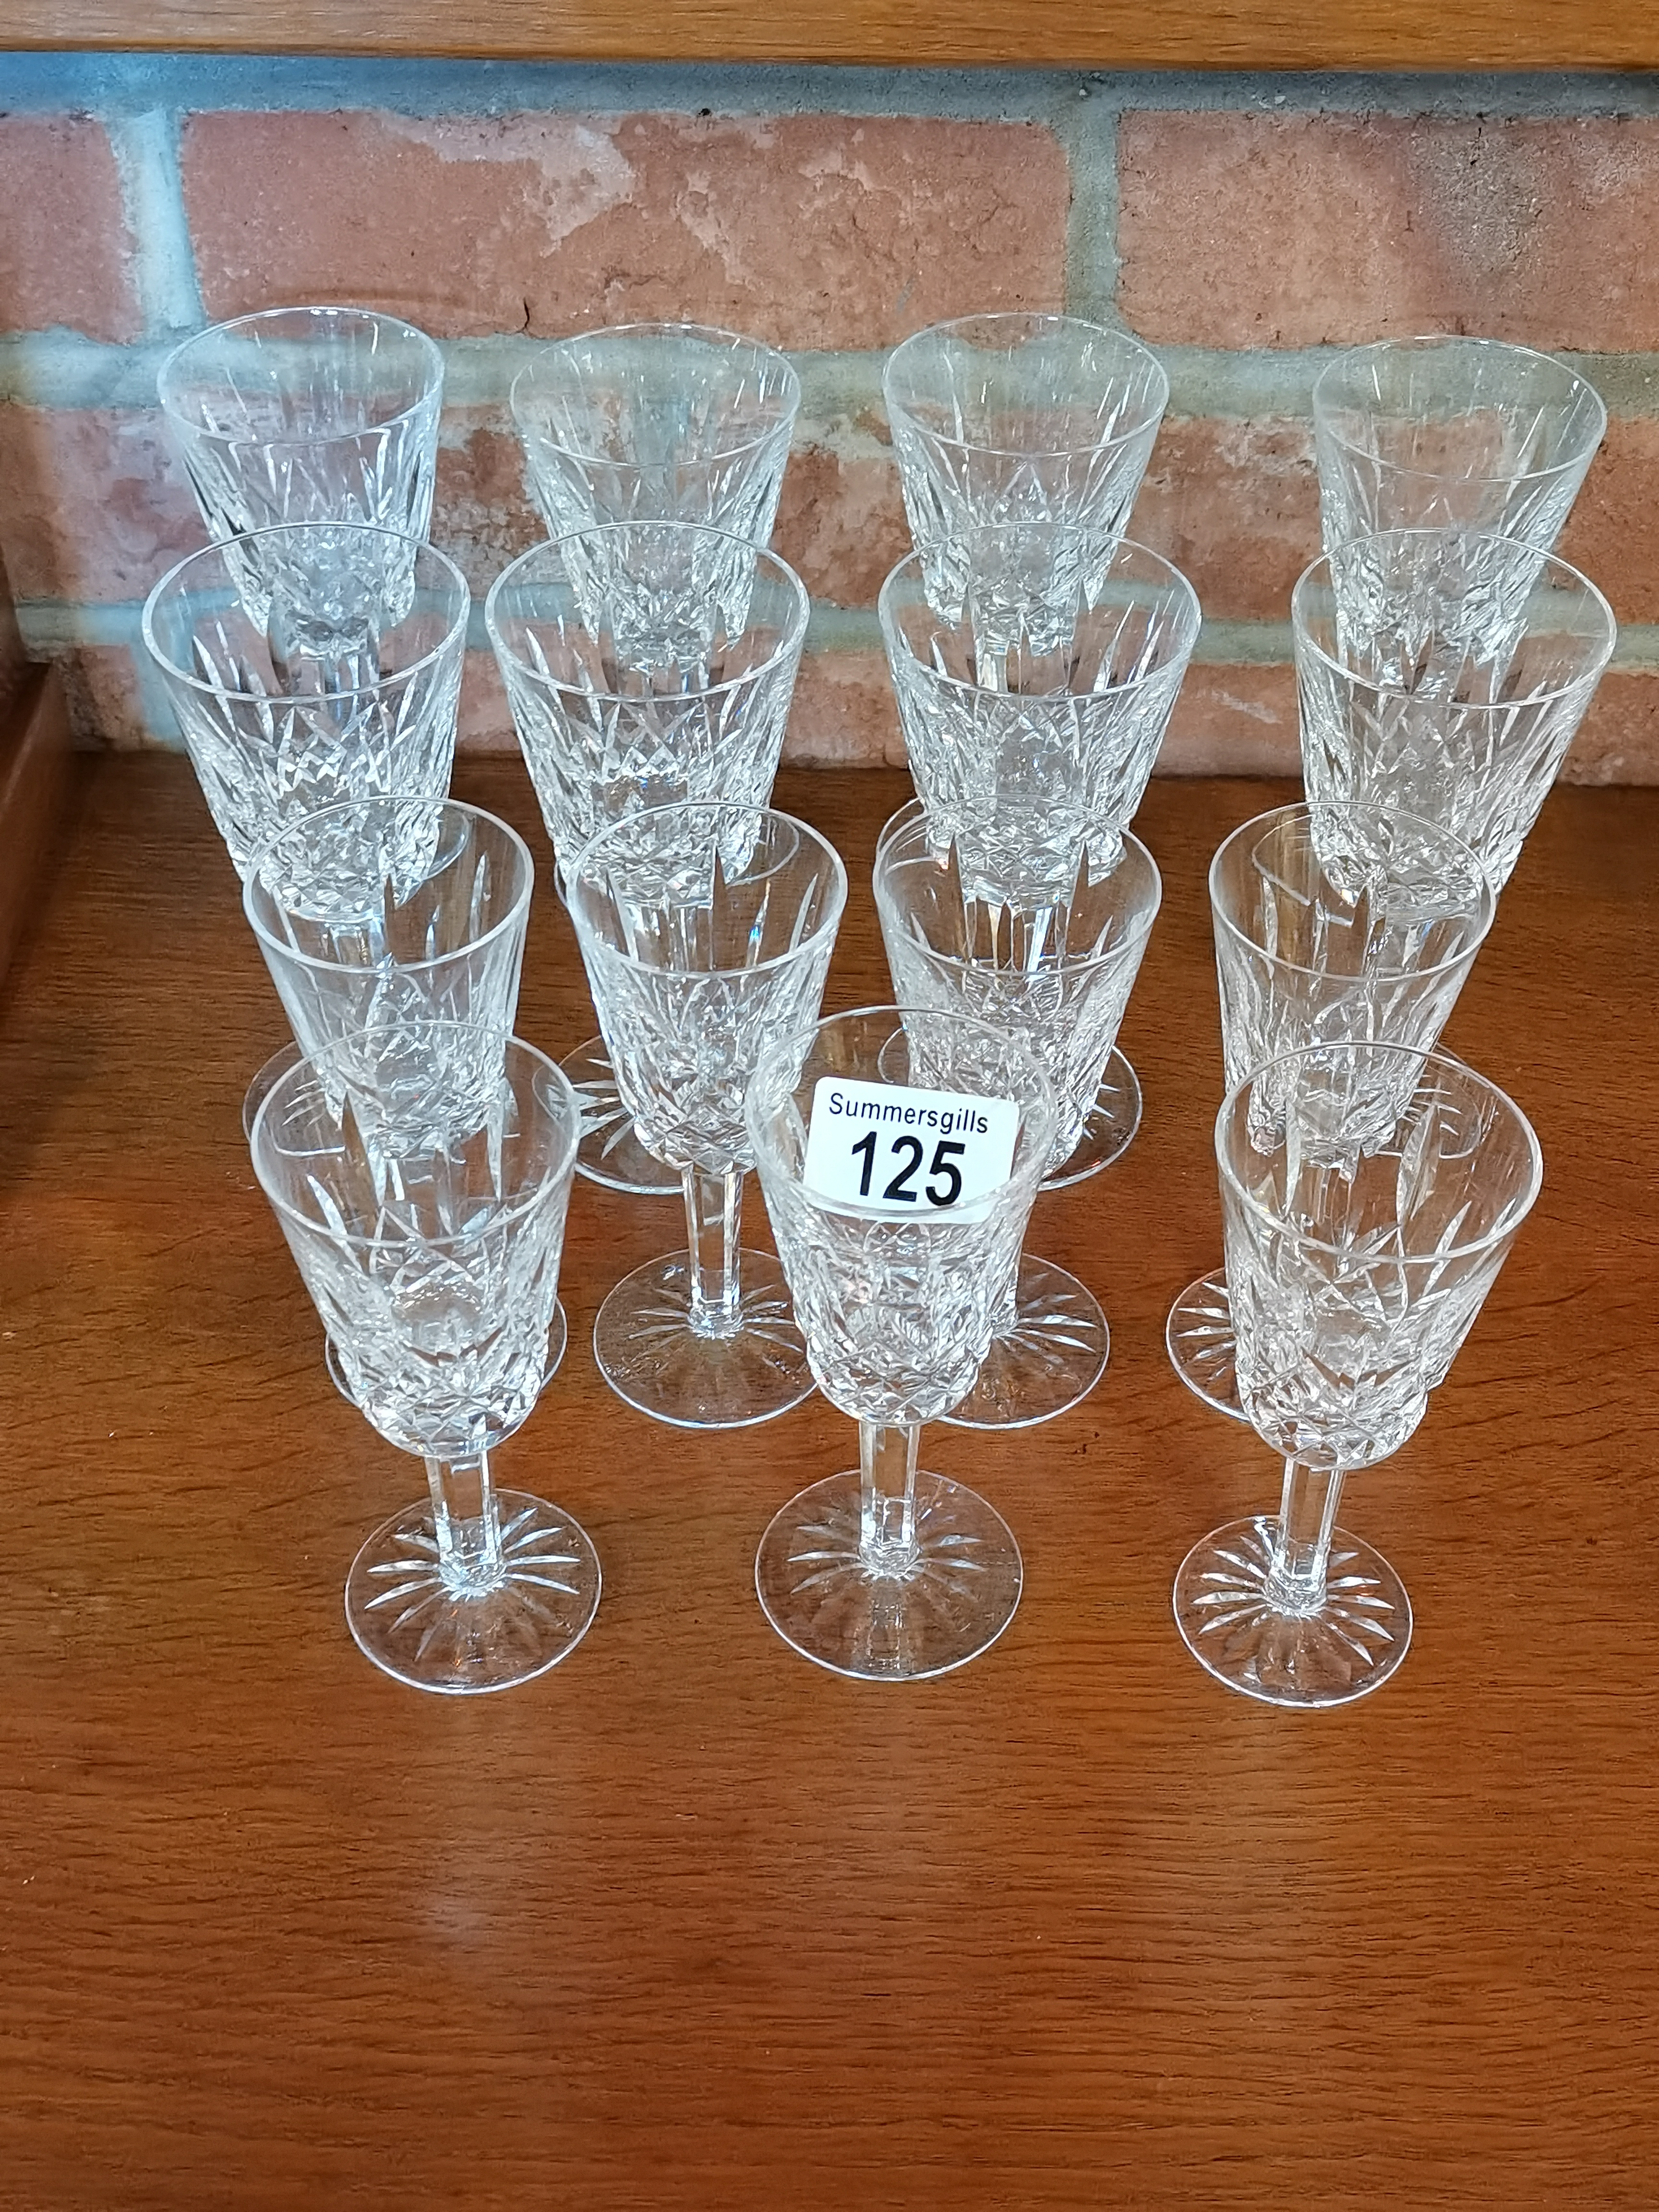 A collection of WATERFORD crystal glasses ( Lismore pattern